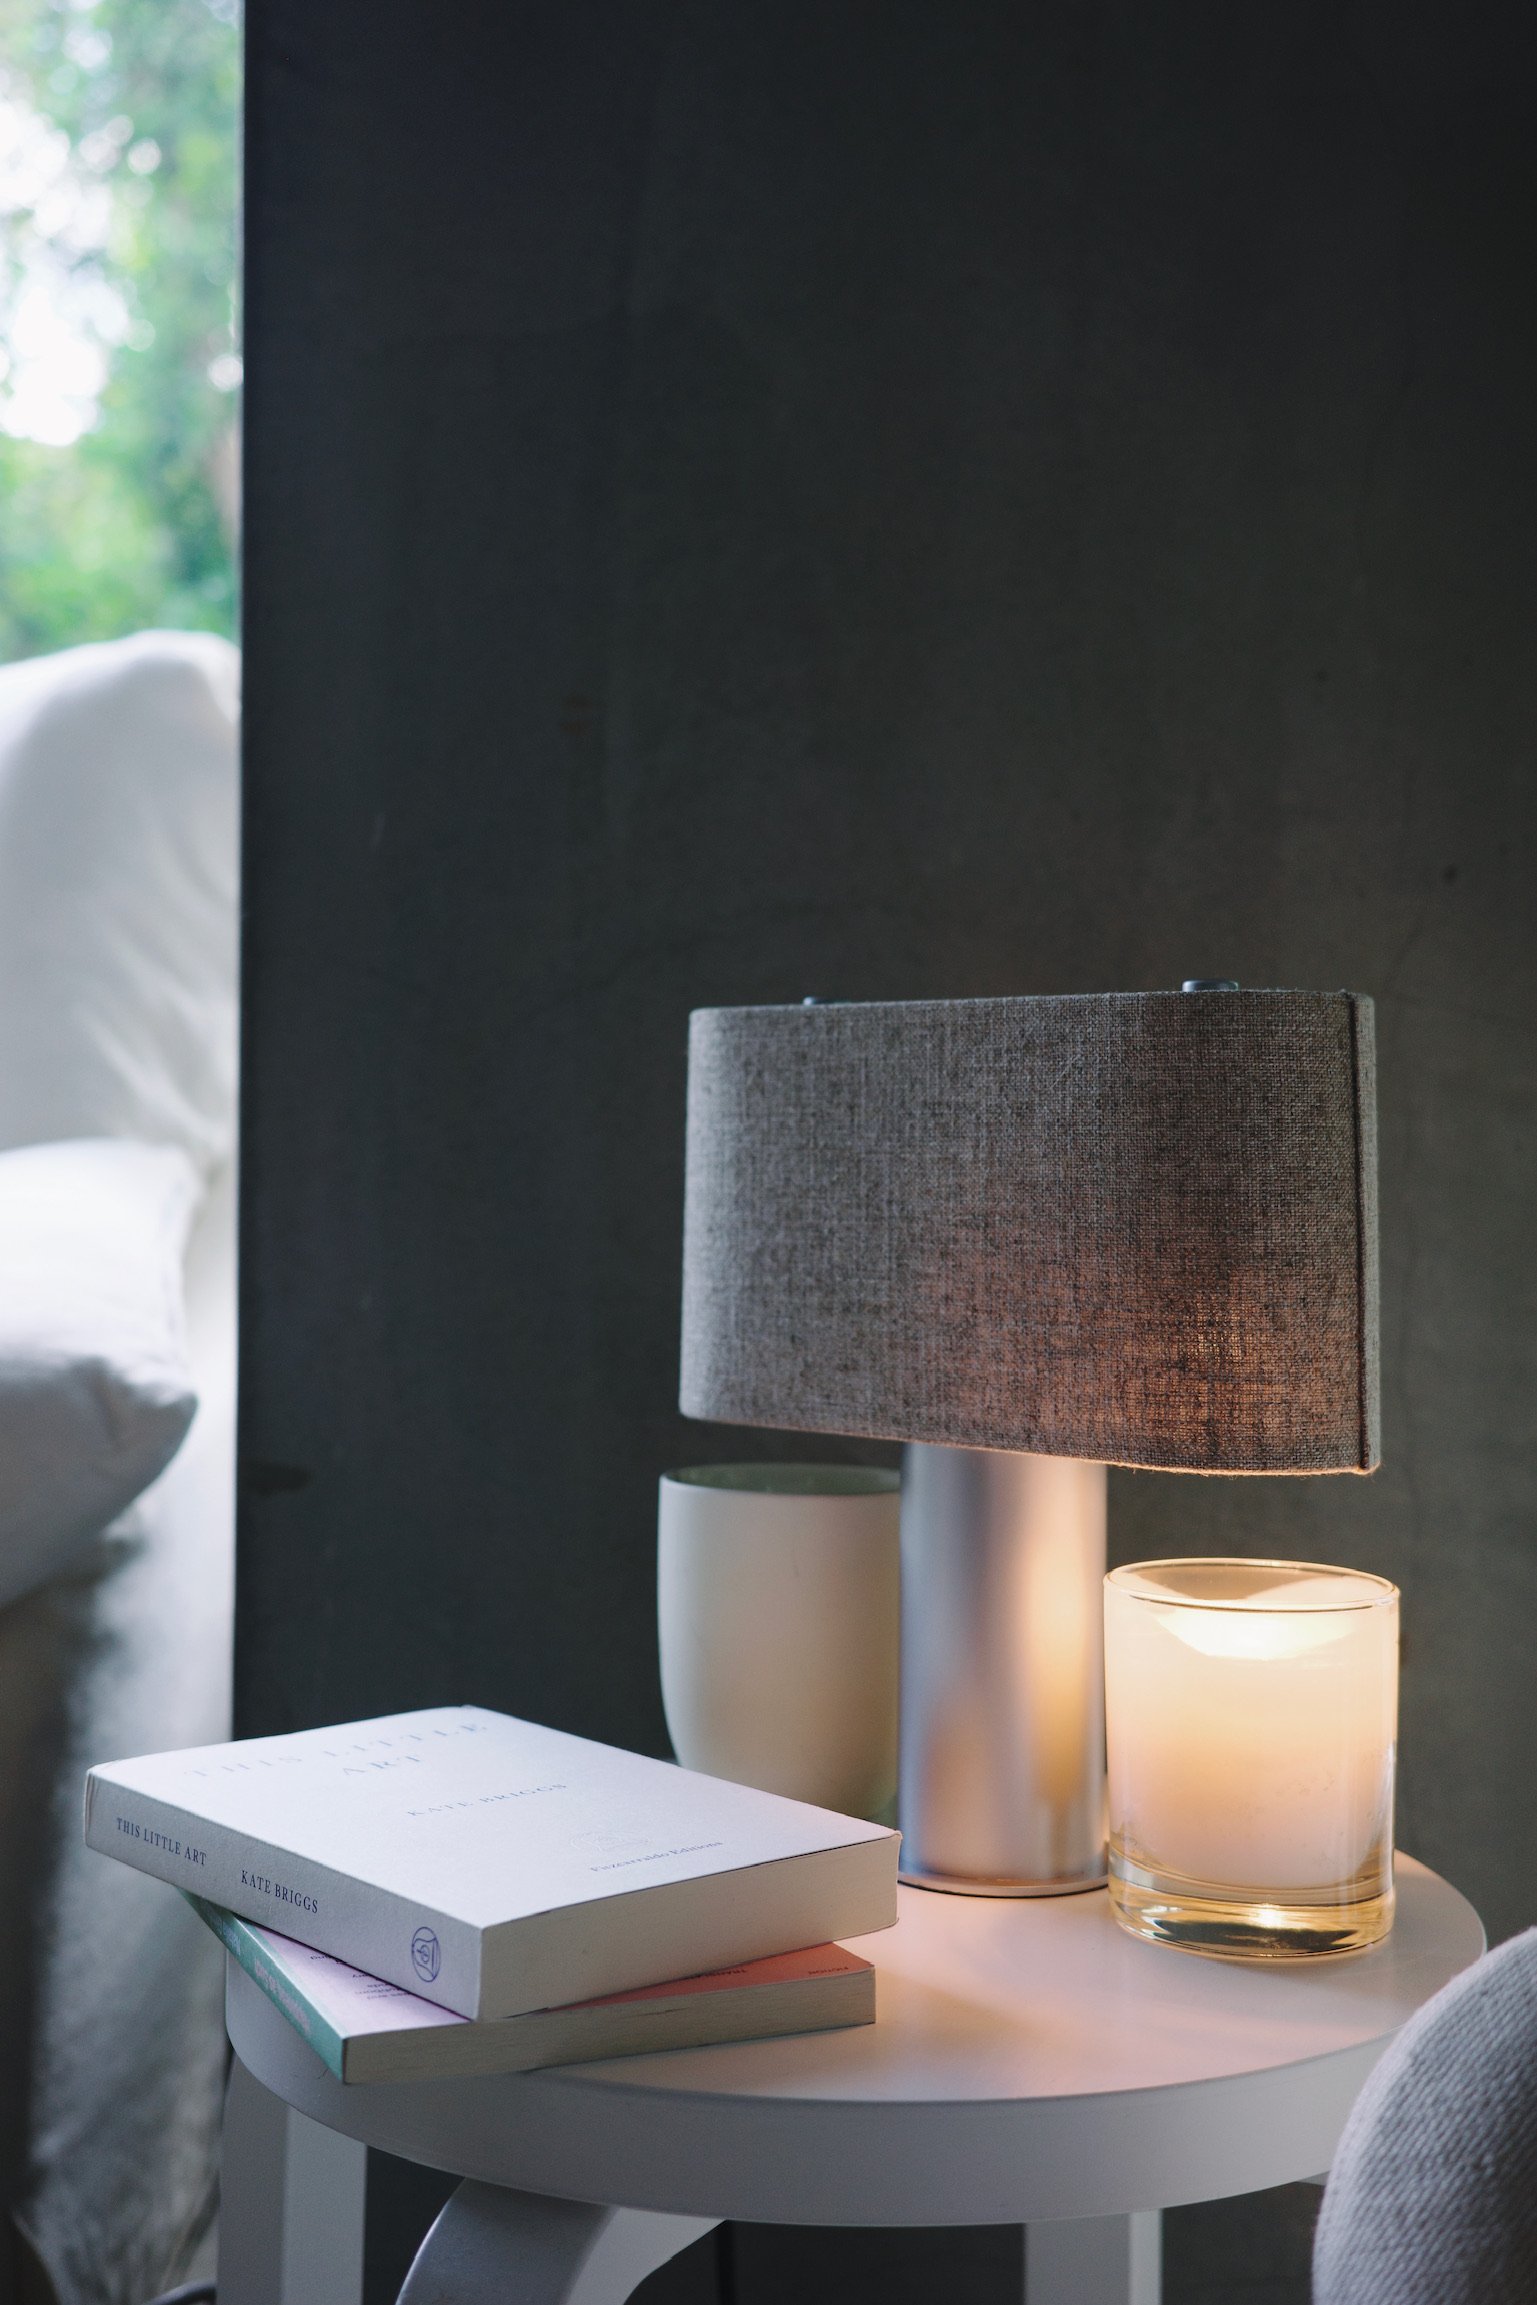 Duo candle warmer lamp by KIMU Design on a stool by two books against a concrete wall.